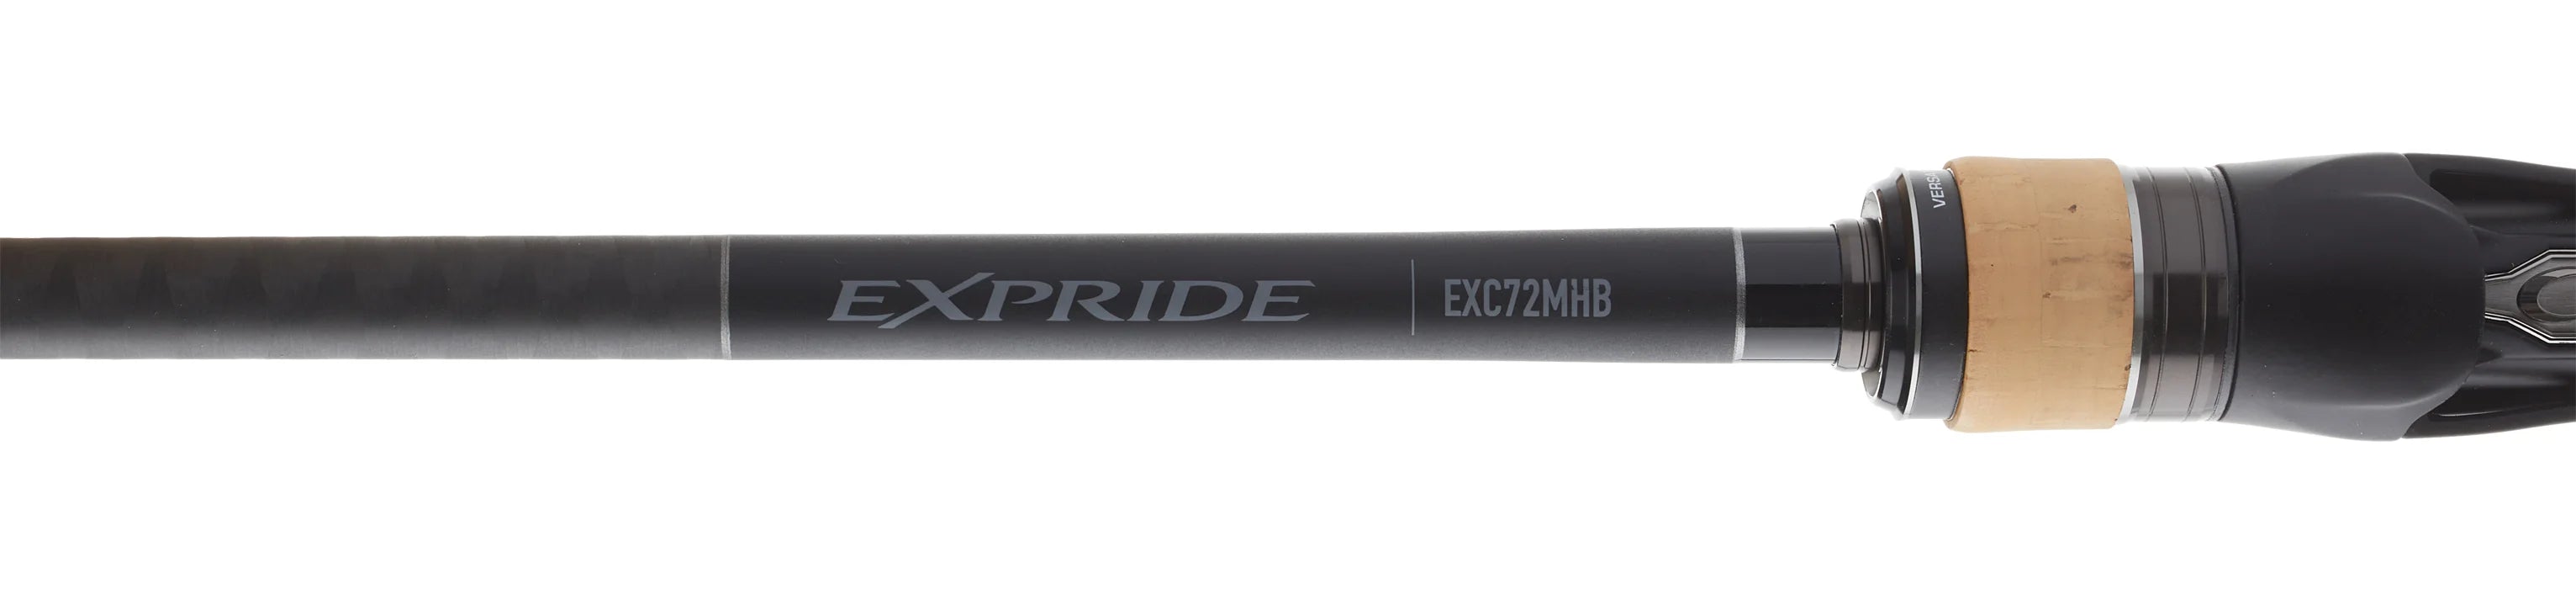 SHIMANO EXPRIDE B CASTING RODS - 0